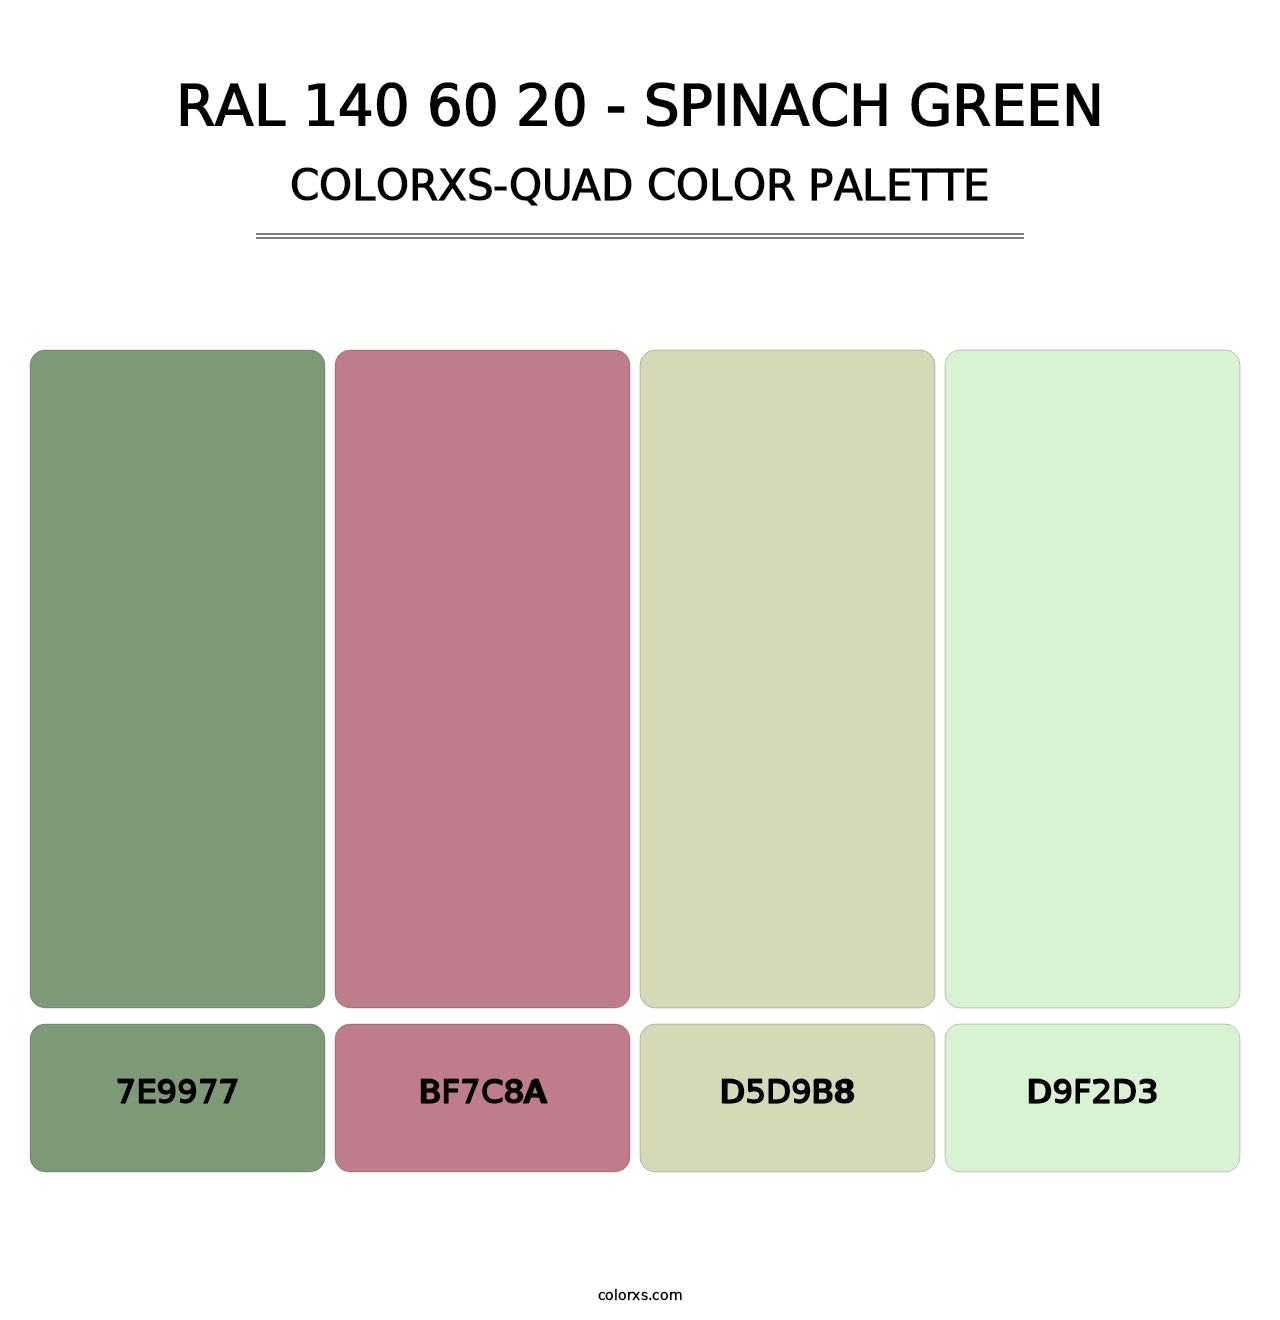 RAL 140 60 20 - Spinach Green - Colorxs Quad Palette